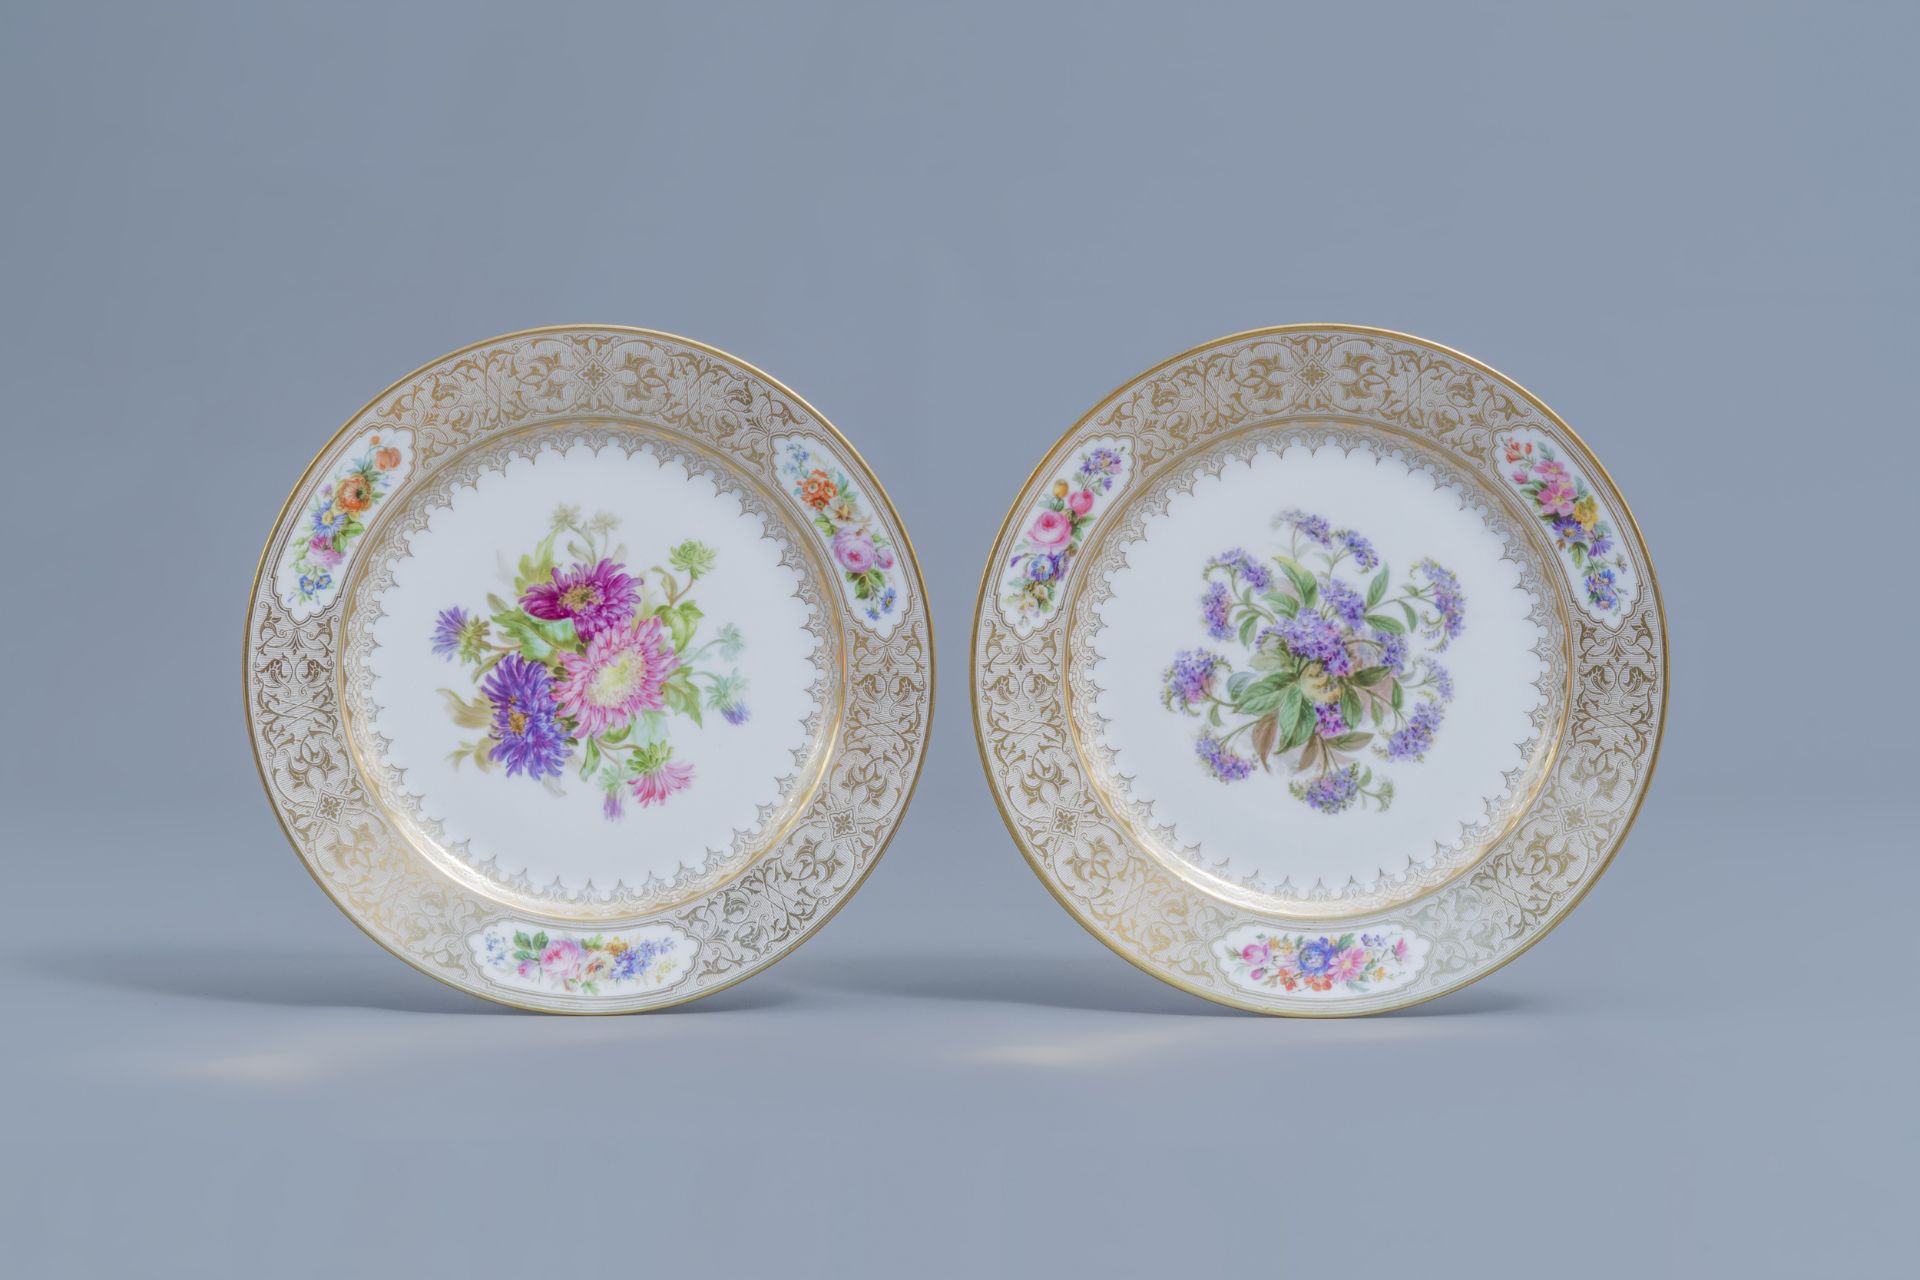 A set of eleven French plates with gilt and polychrome floral design, Svres mark, 19th C. - Image 20 of 22